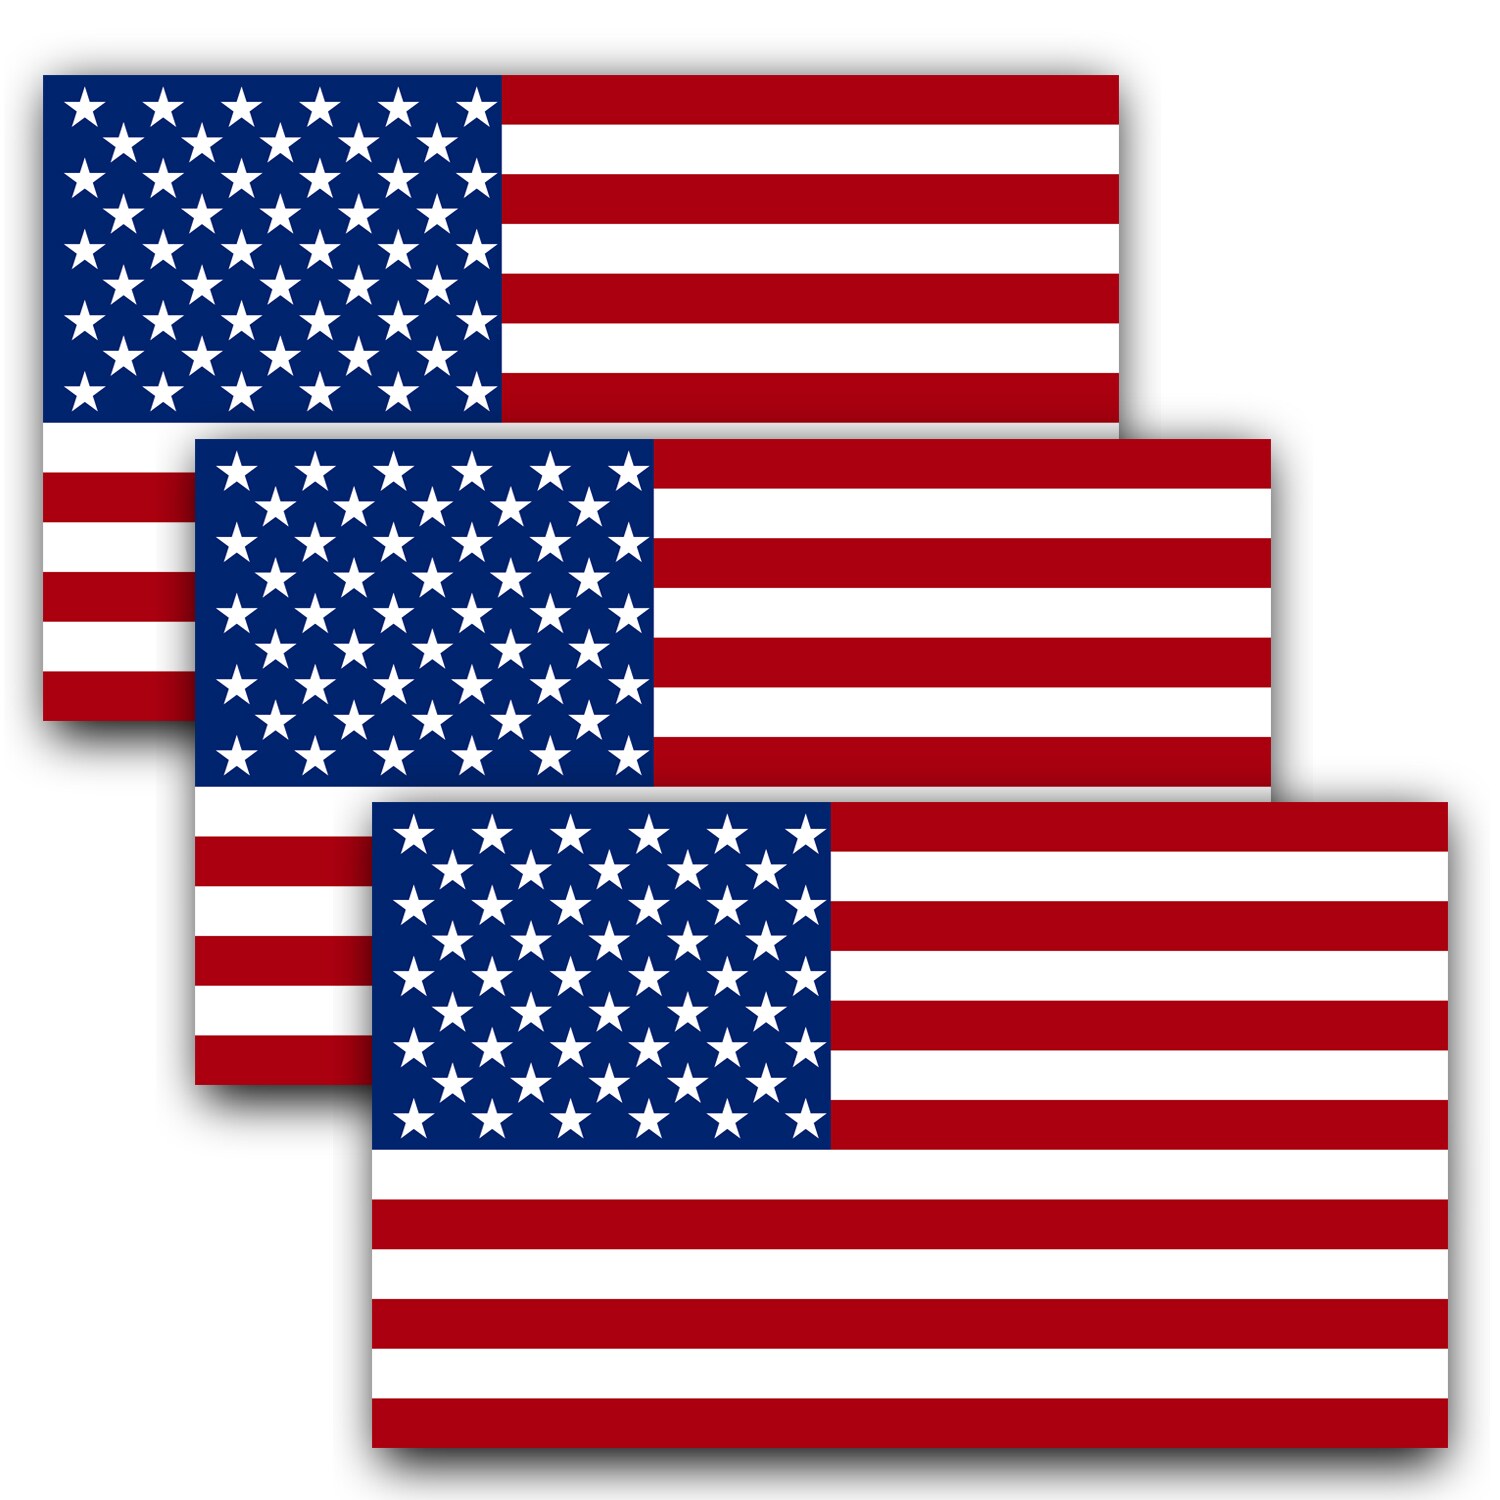 2X Black and White United States American Flag Stickers 5x3 Inch Decal 